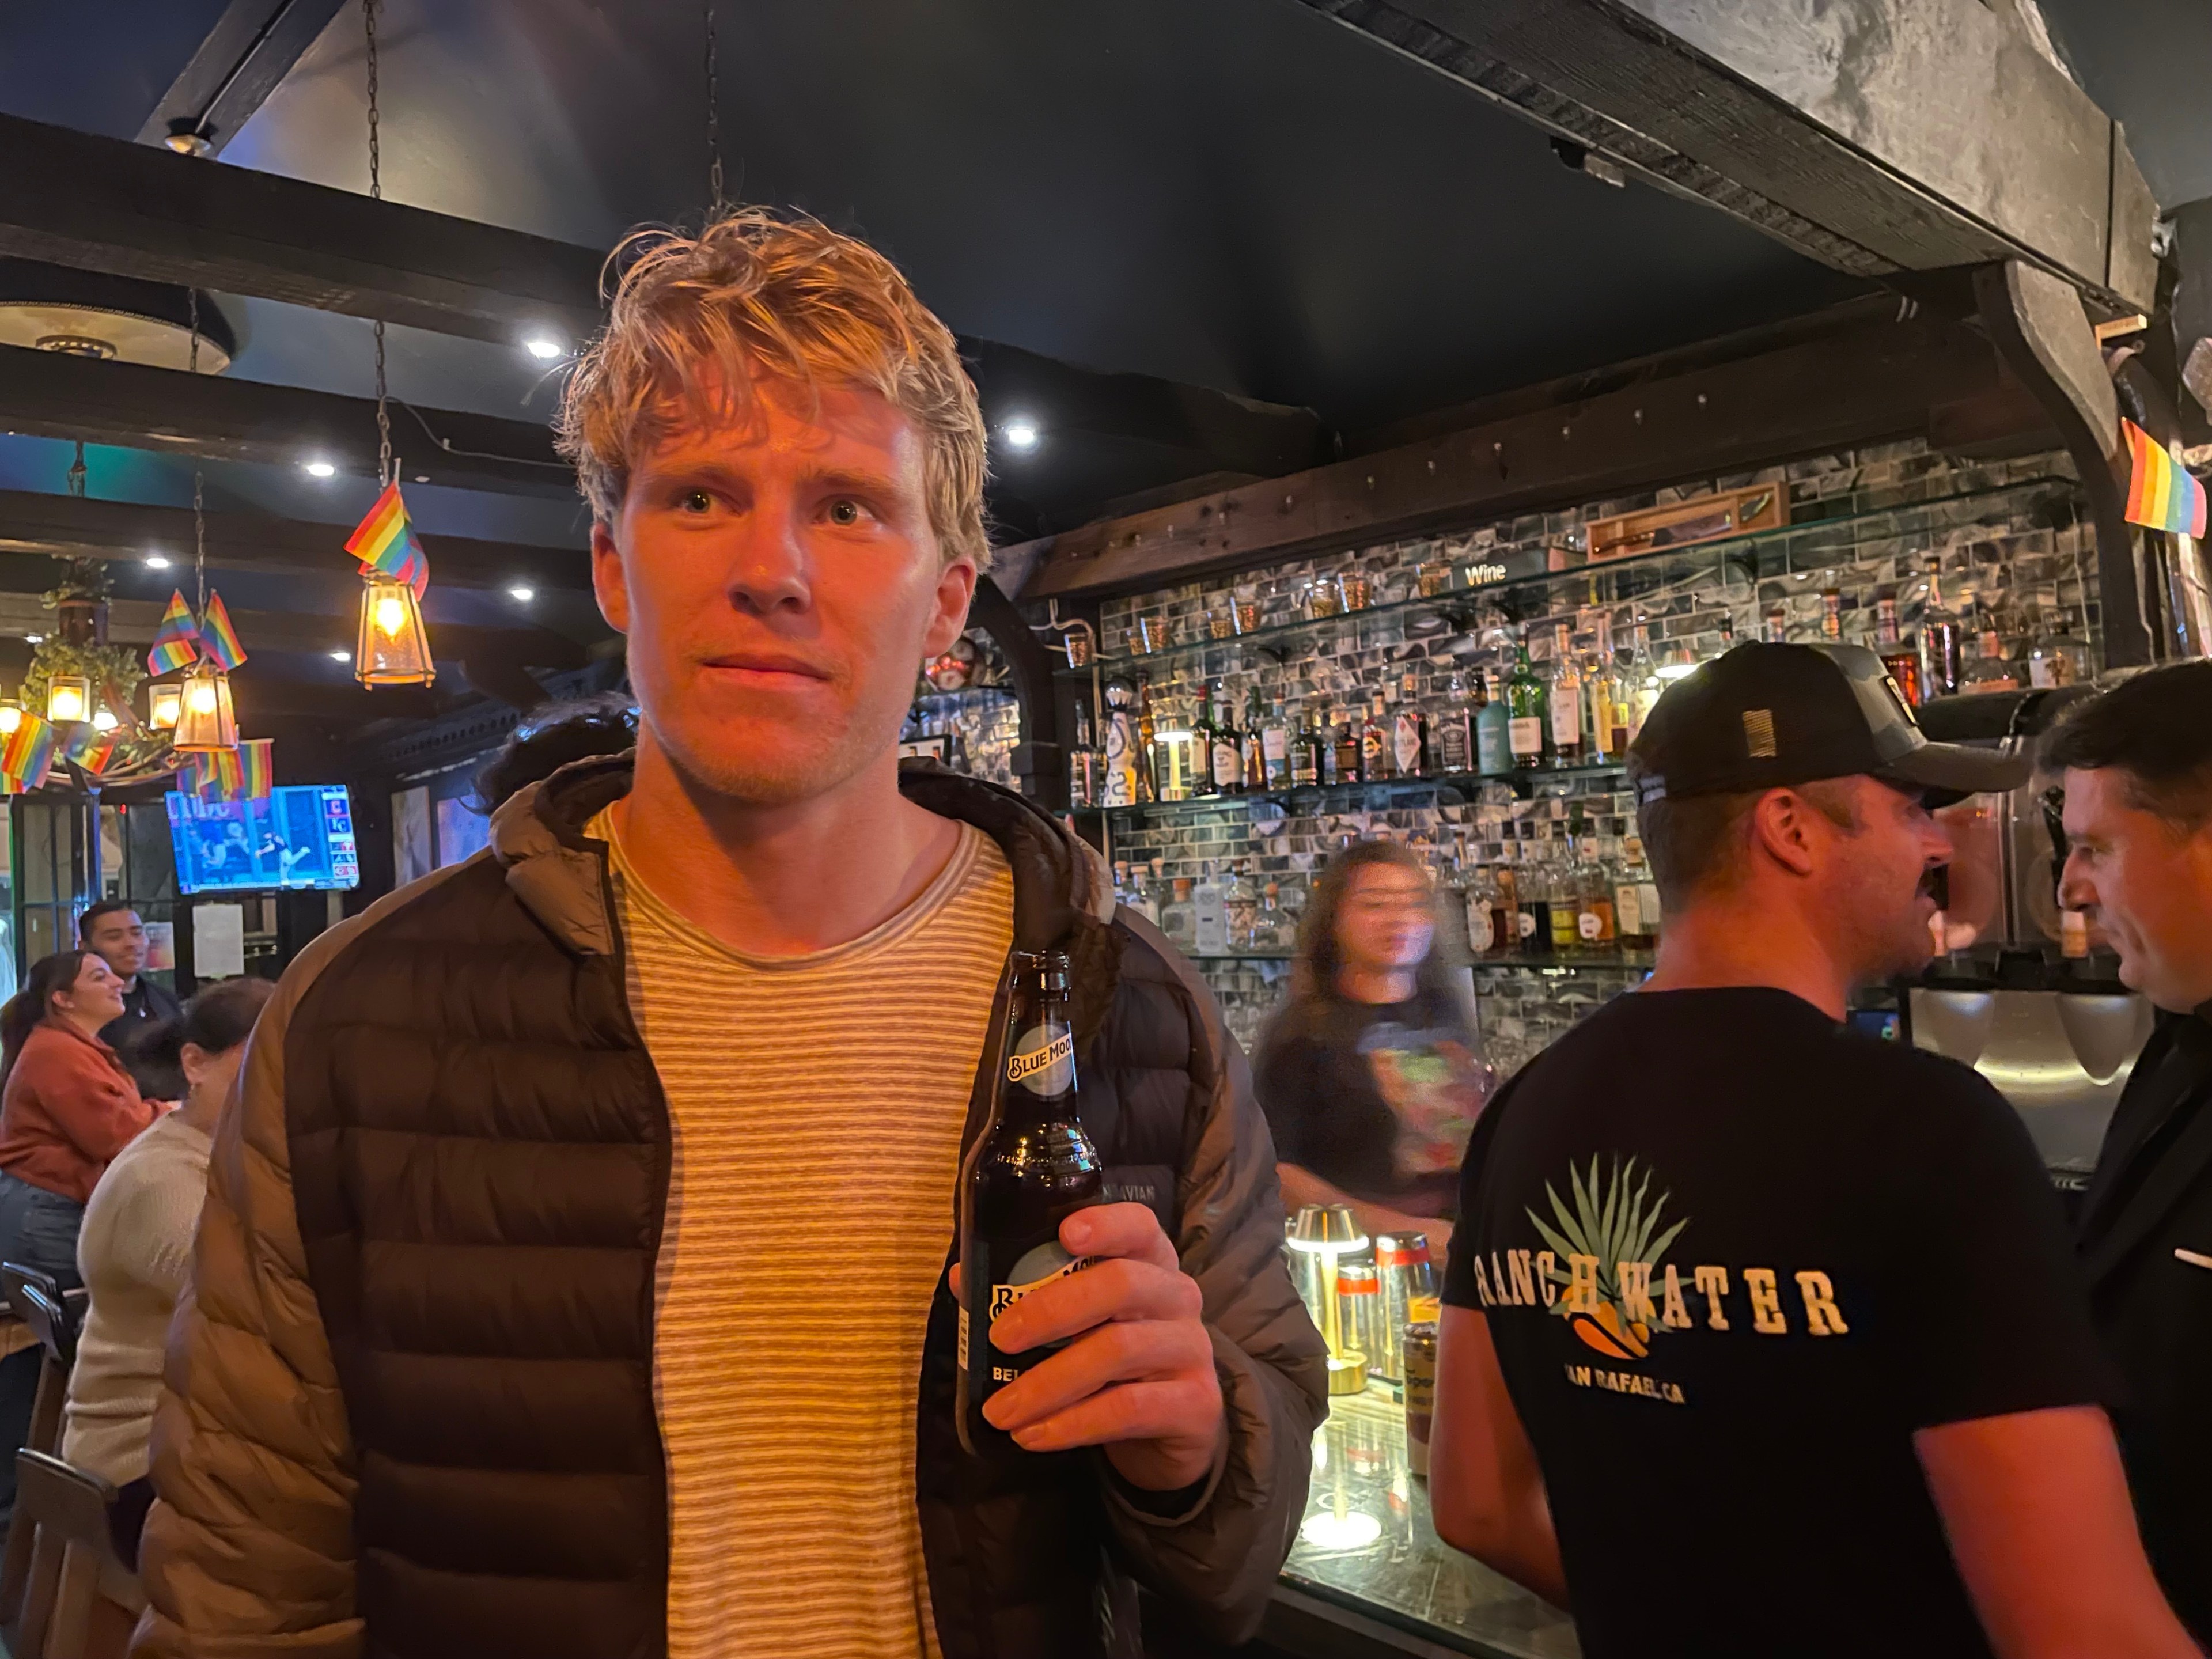 A man with blond hair, wearing a striped shirt and puffy jacket, holds a bottle in a bar. The background shows people, shelves of liquor, and pride flags.